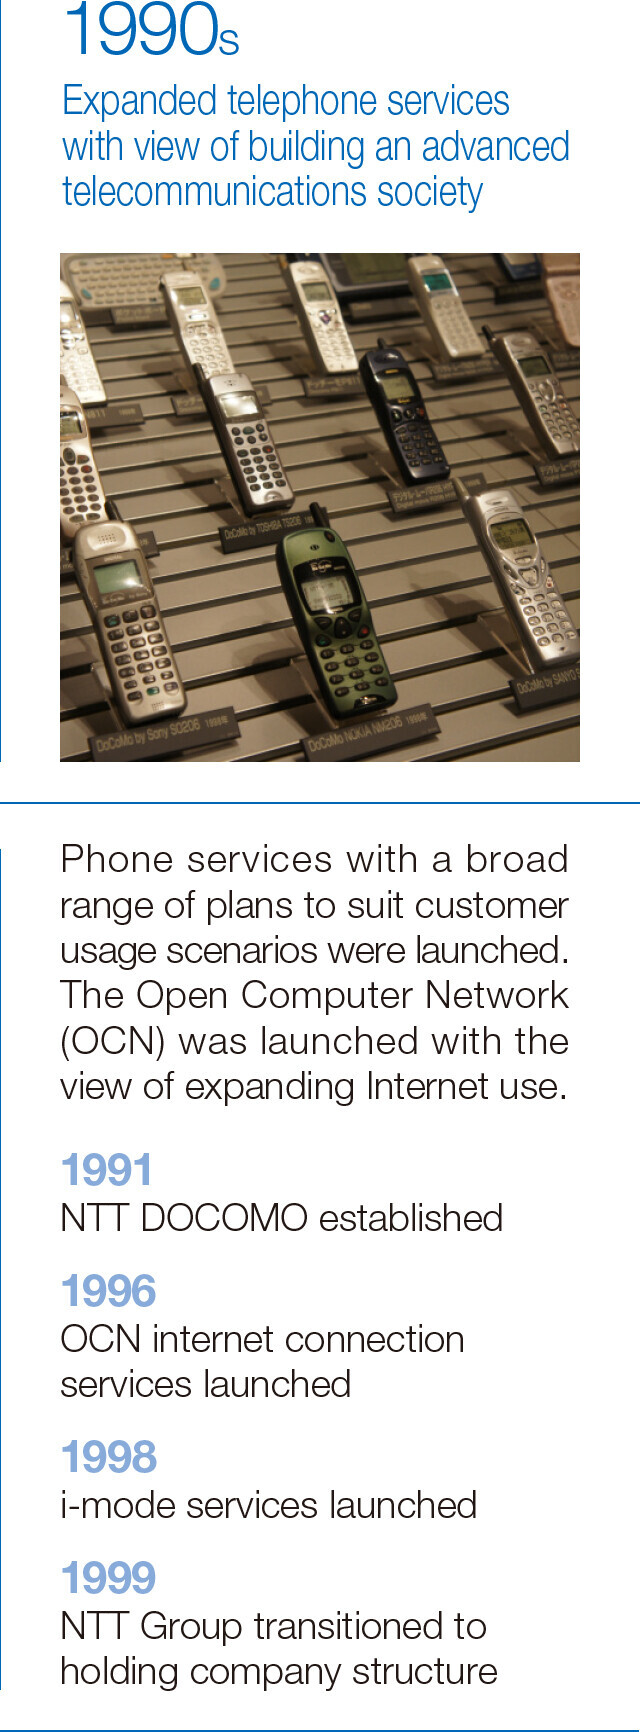 1990s Expanded telephone services with view of building an advanced telecommunications society